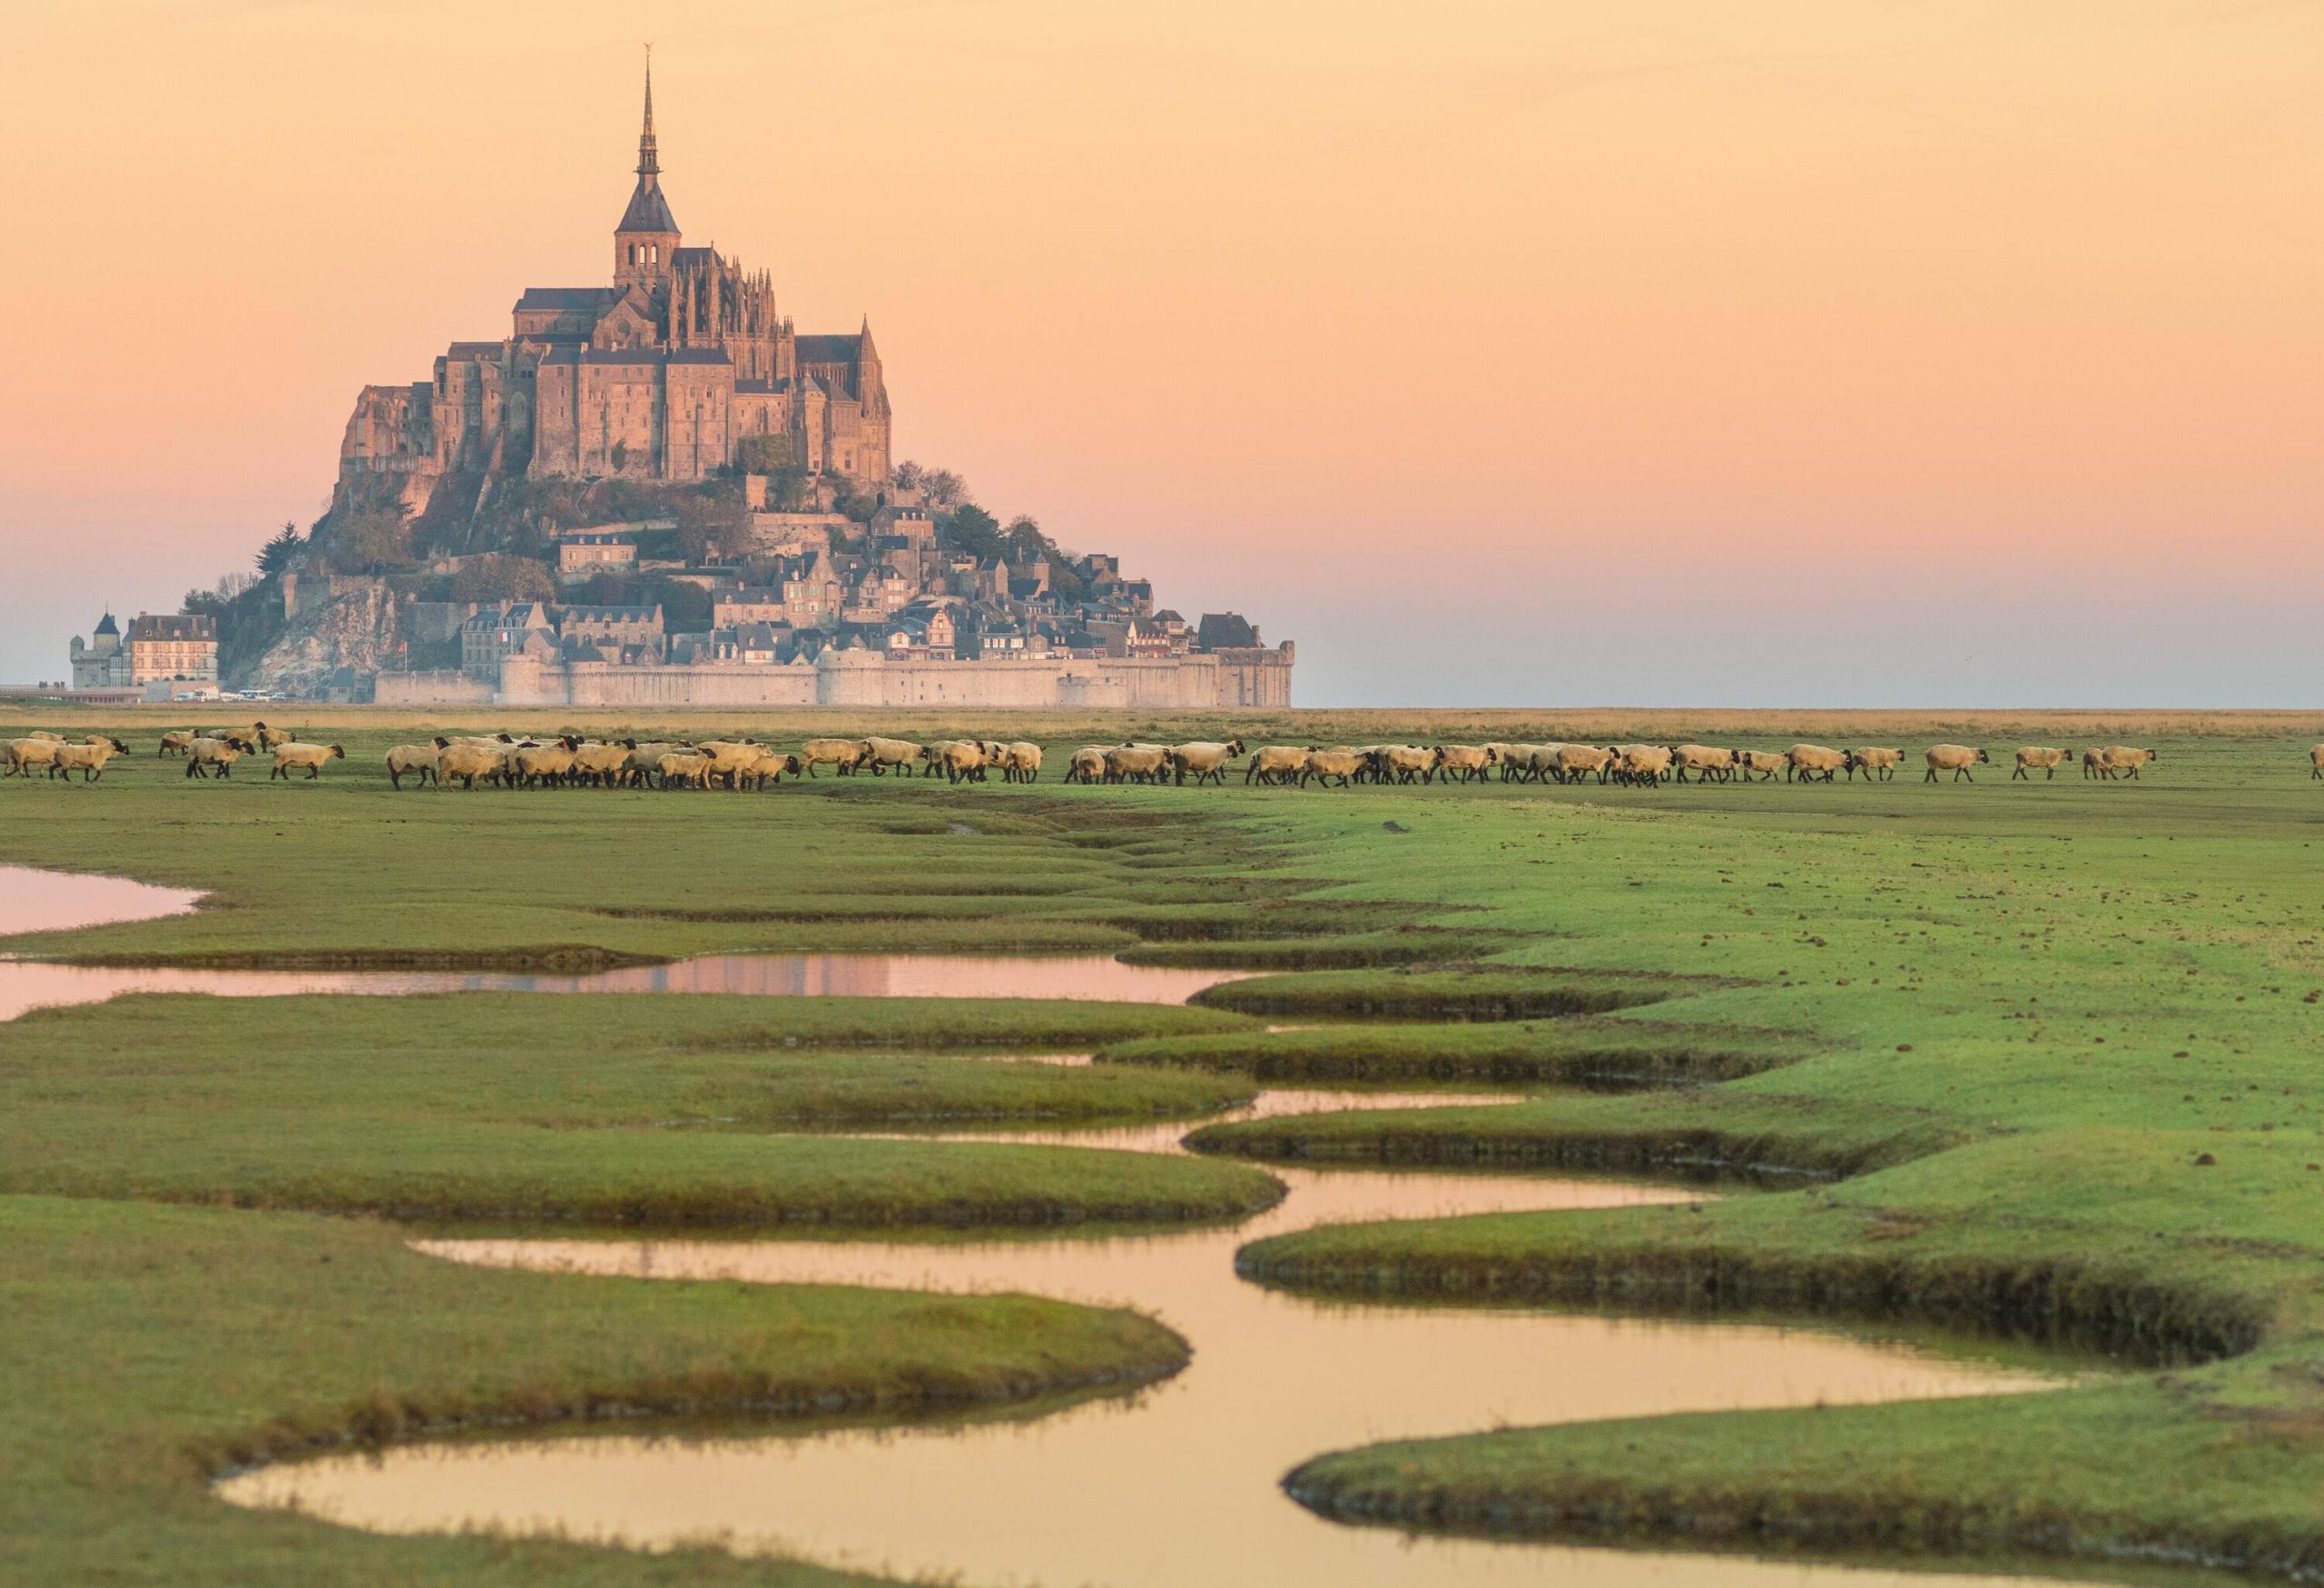 dest_france_mont_saint_michel_gettyimages-646960680_universal_within-usage-period_85197